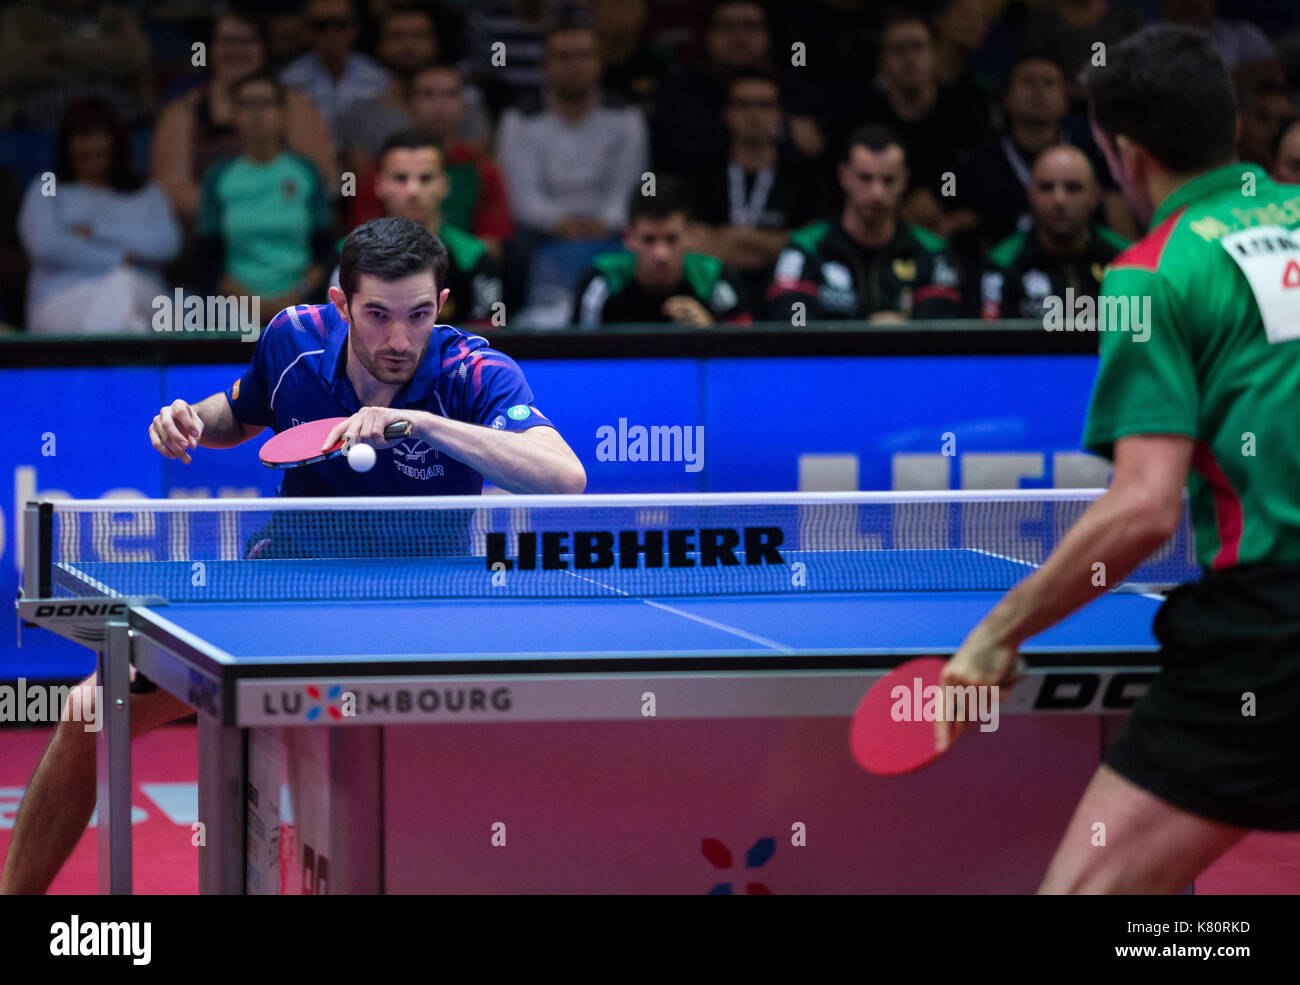 Lebesson Emmanuel of France (L) in action against Freitas Marcos of  Portugal during the men's team semi-final between France and Portugal  during the ITTF European Team Table Tennis Championships 2017 in Luxembourg,